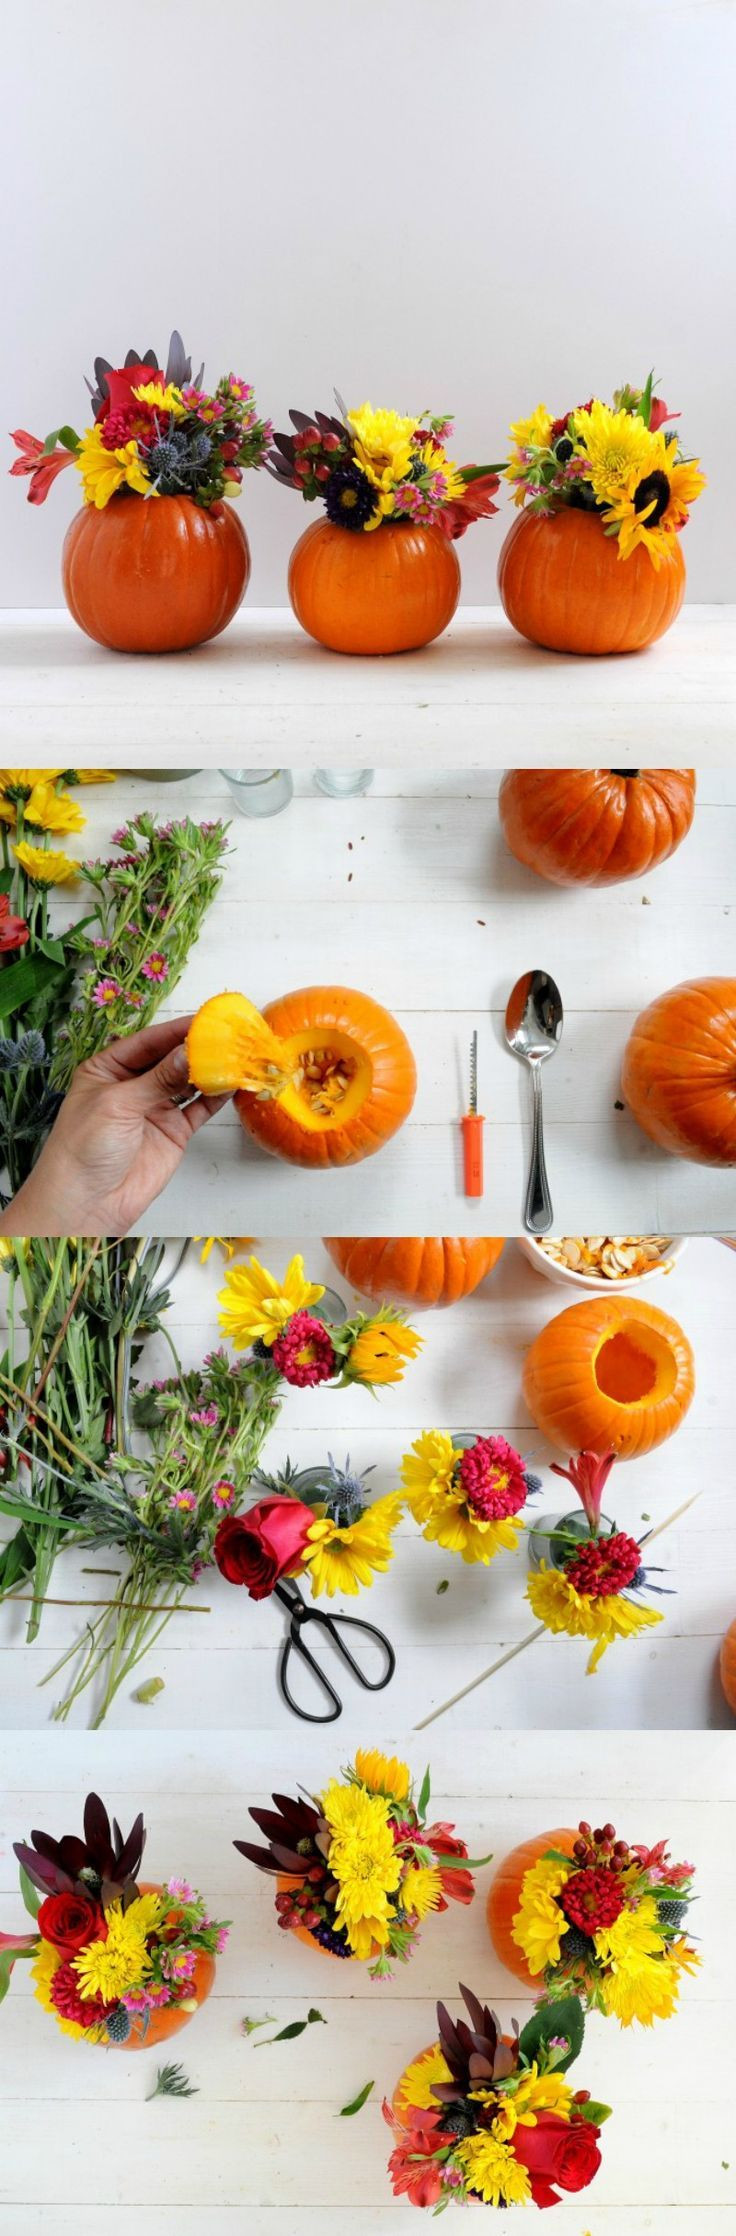 27 Stylish Pumpkins as Vases for Centerpieces 2024 free download pumpkins as vases for centerpieces of diy mini pumpkin vase for fall pumpkin vase thanksgiving table in are you looking for an easy floral decor project that gets your home fall ready ac2b7 